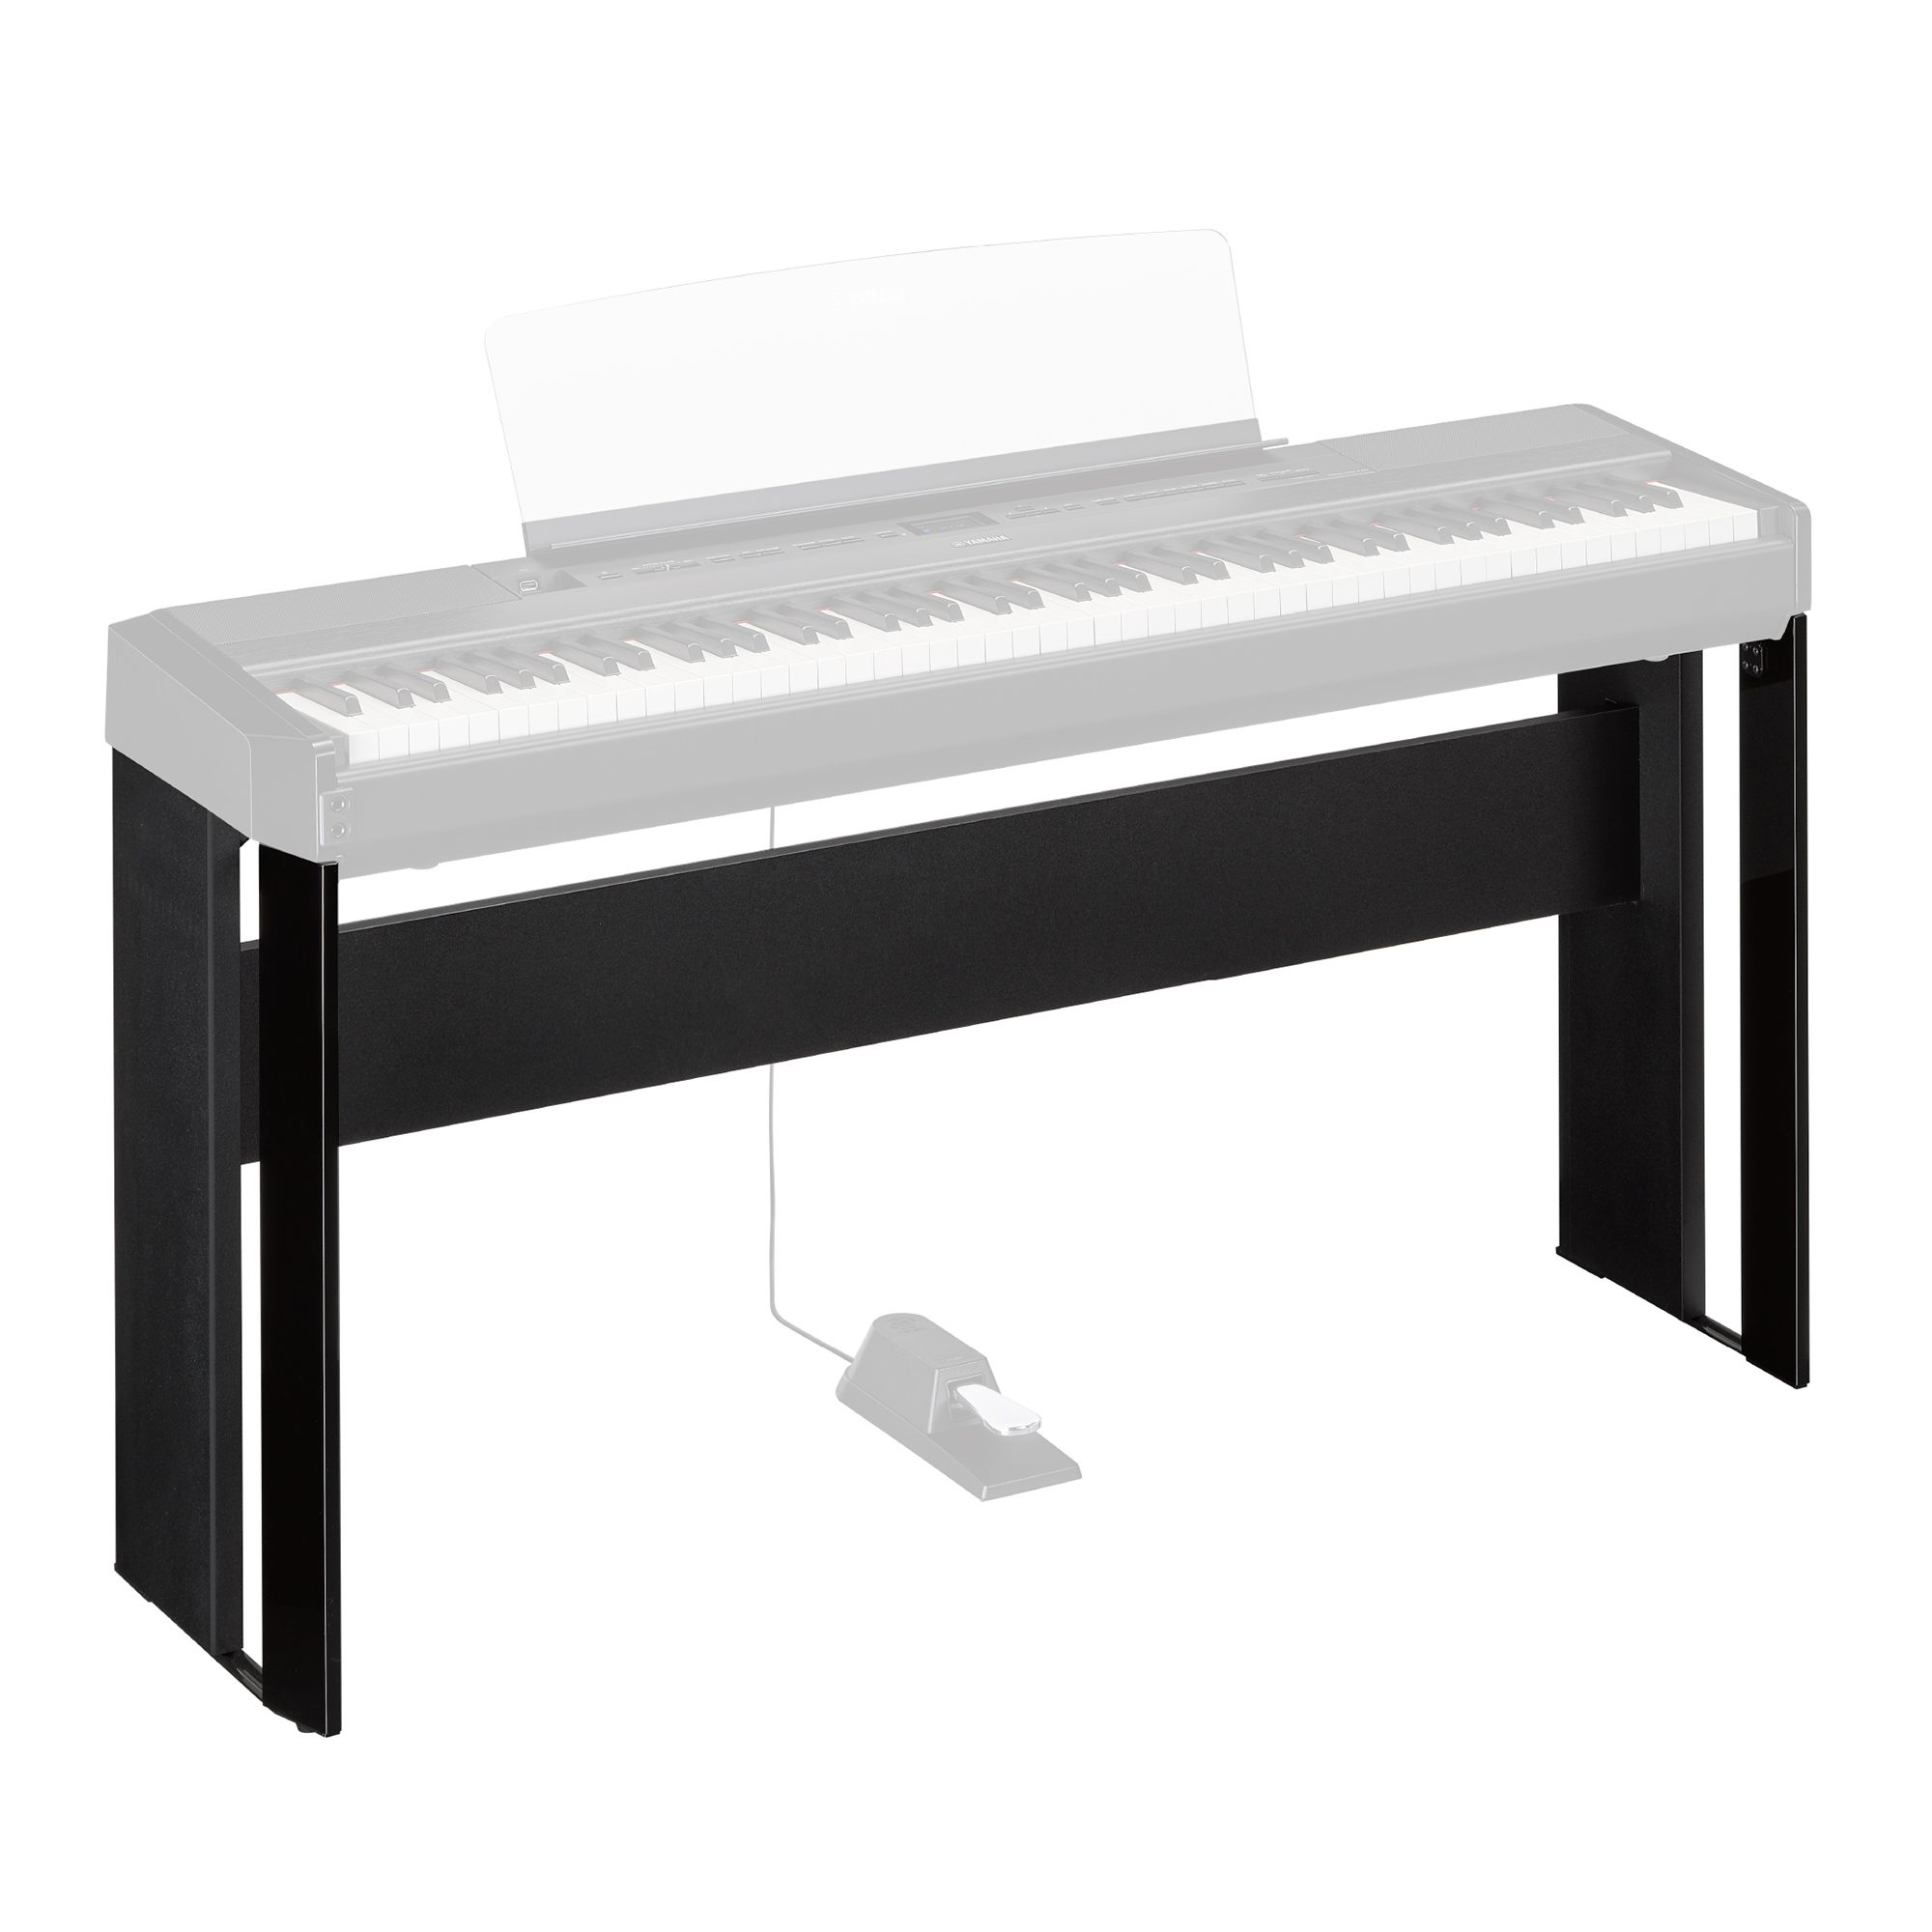 L-515 - Overview - Accessories - Pianos - Musical Instruments